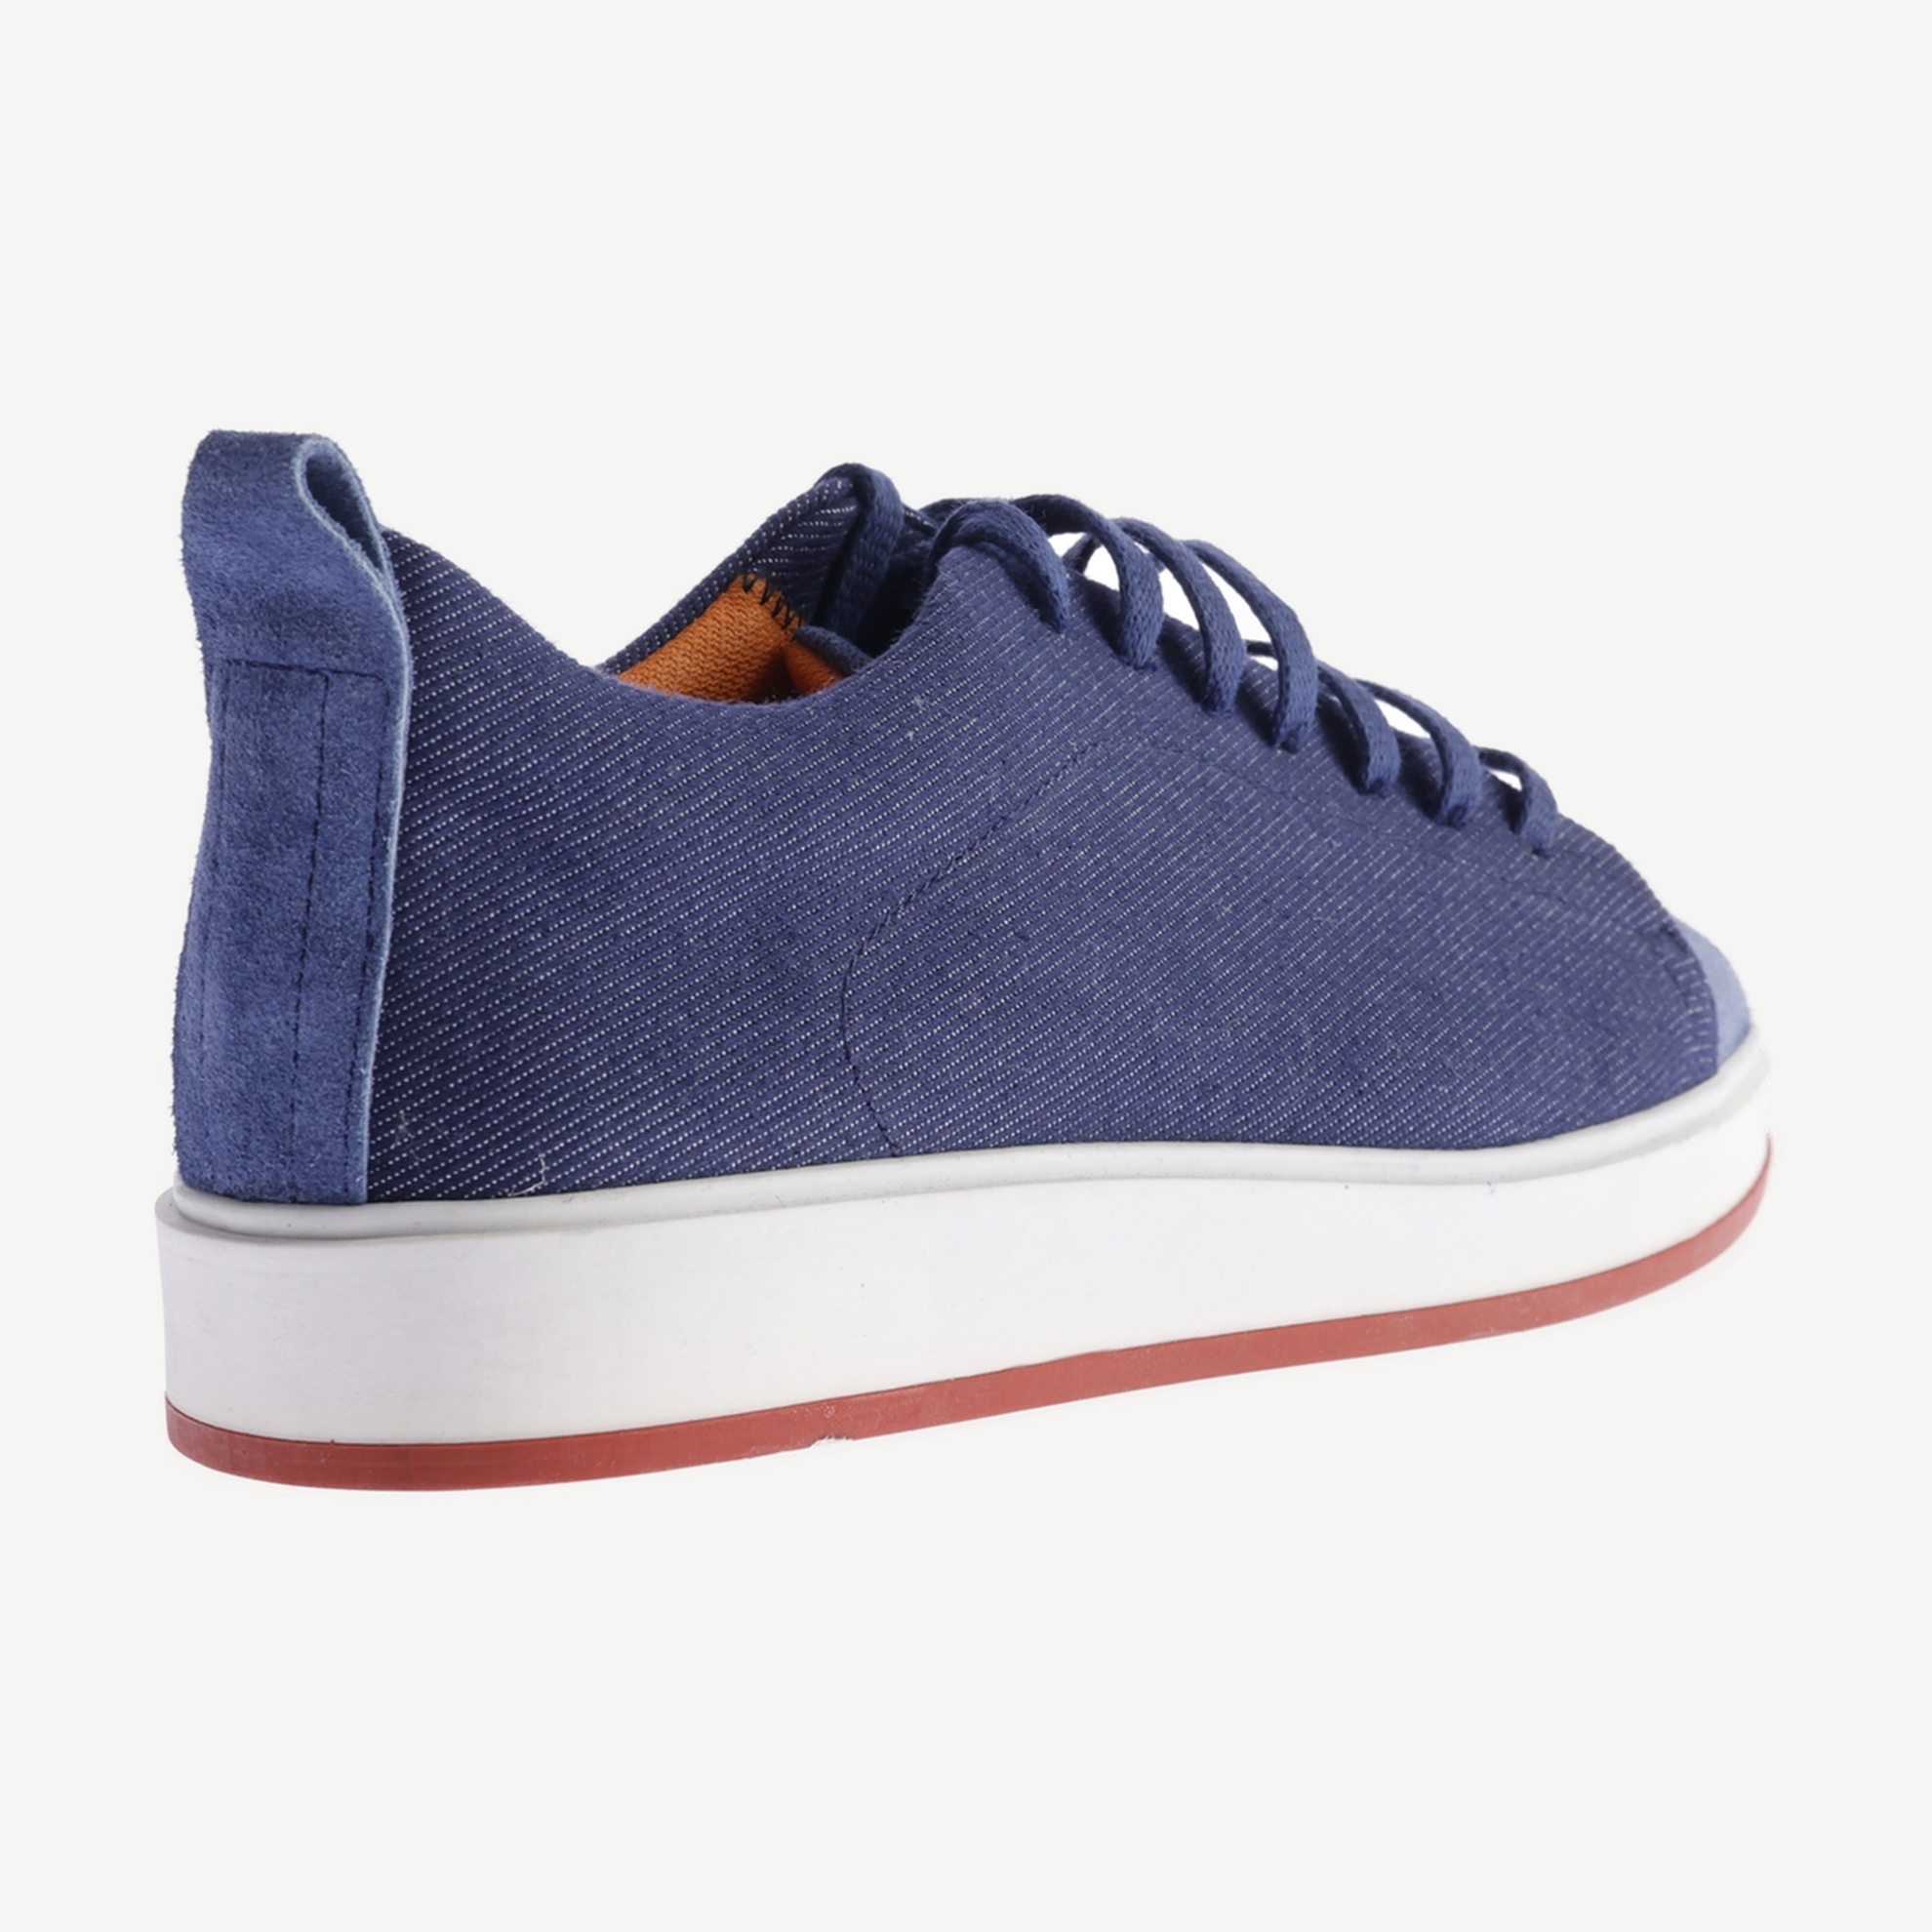 Denim Sneaker With Suede Leather Detail